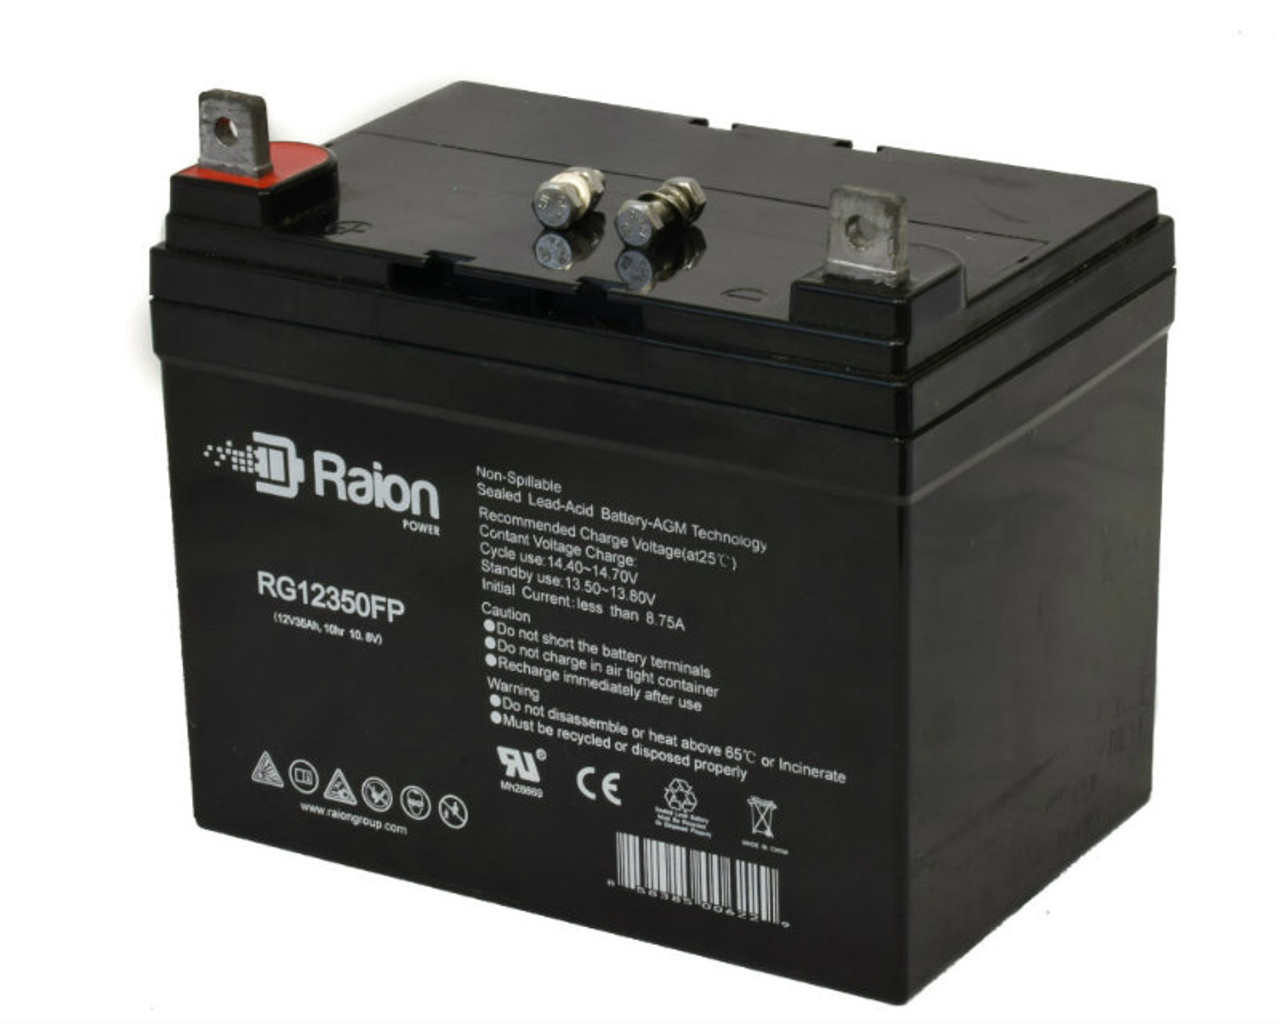 Raion Power Replacement 12V 35Ah RG12350FP Battery for Lawn-Boy 9303E